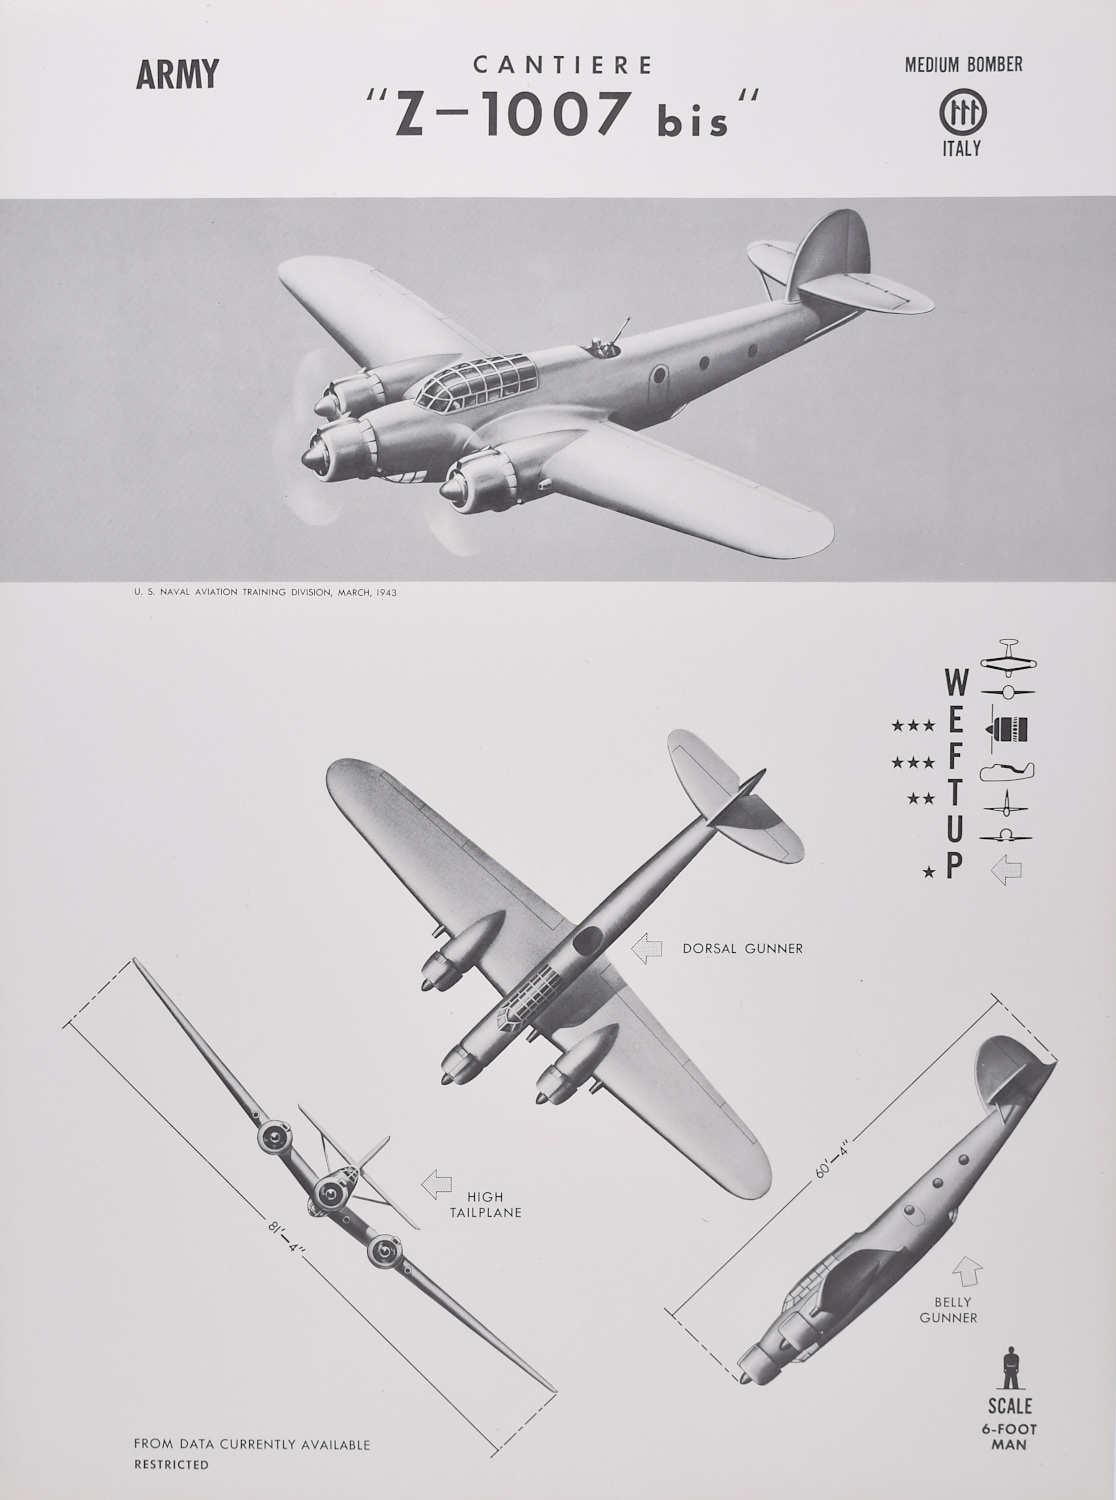 1943 Cantiere "Z-1007 bis" Italian medium bomber plane identification poster WW2 - Print by Unknown